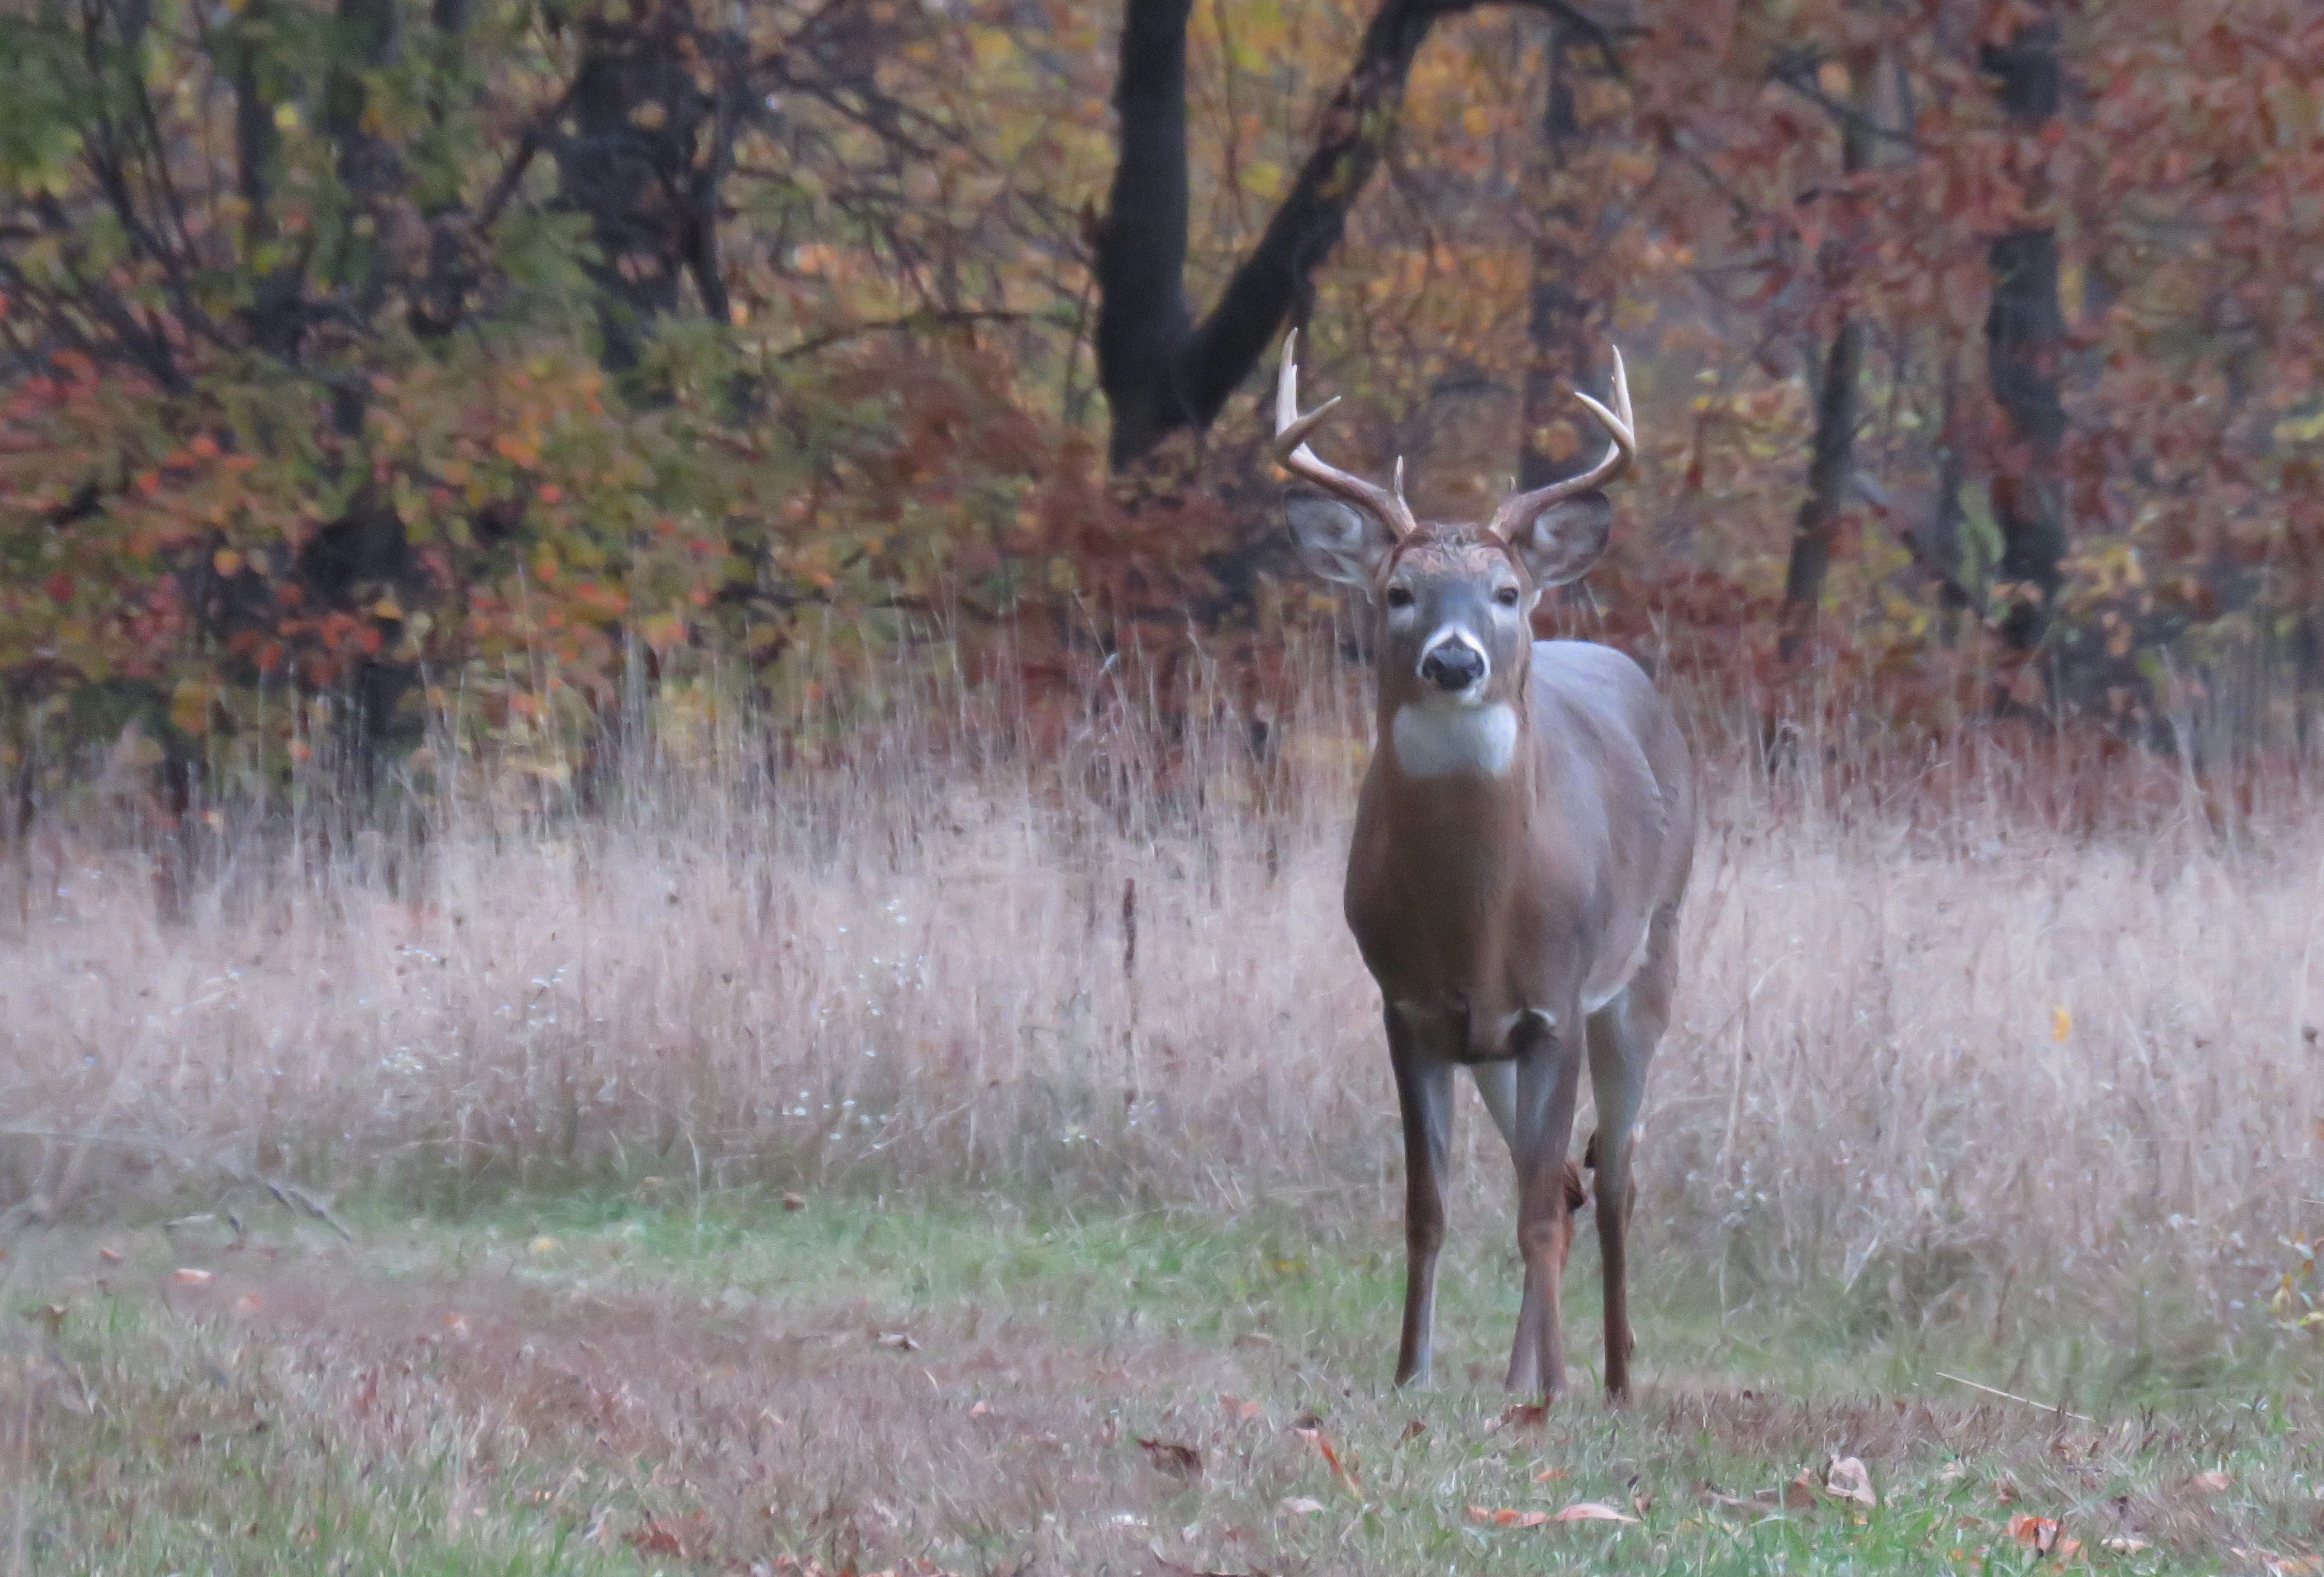 A buck stands in a clearing in the woods staring right at the photographer.